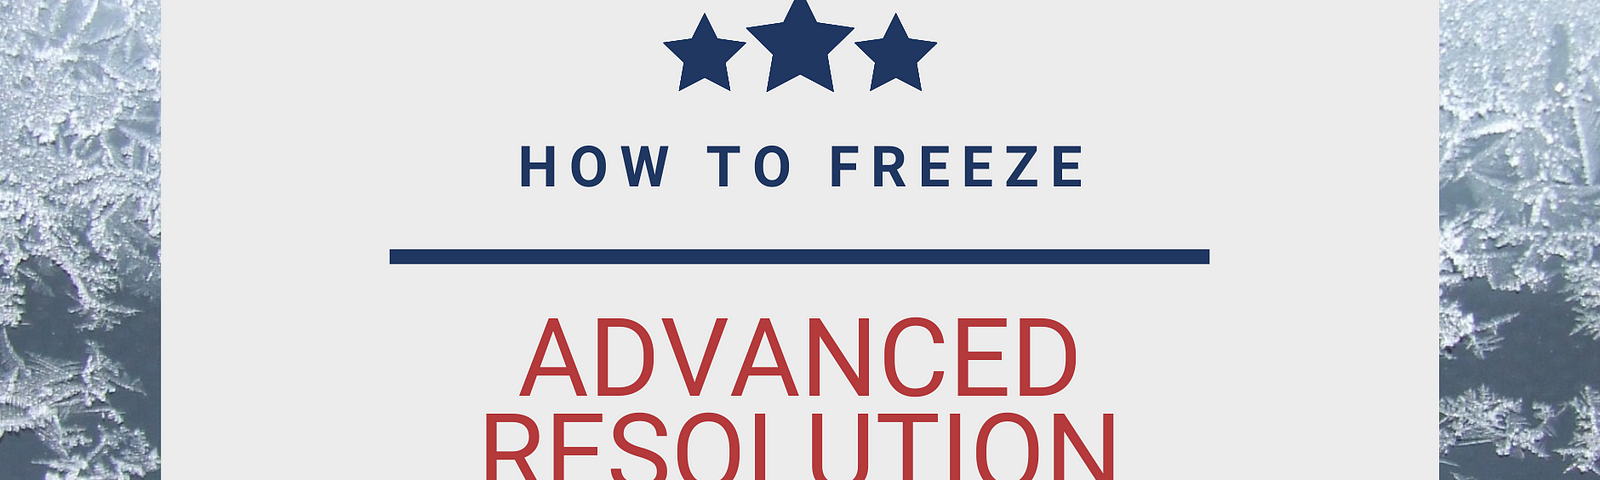 Advanced resolution services security freeze